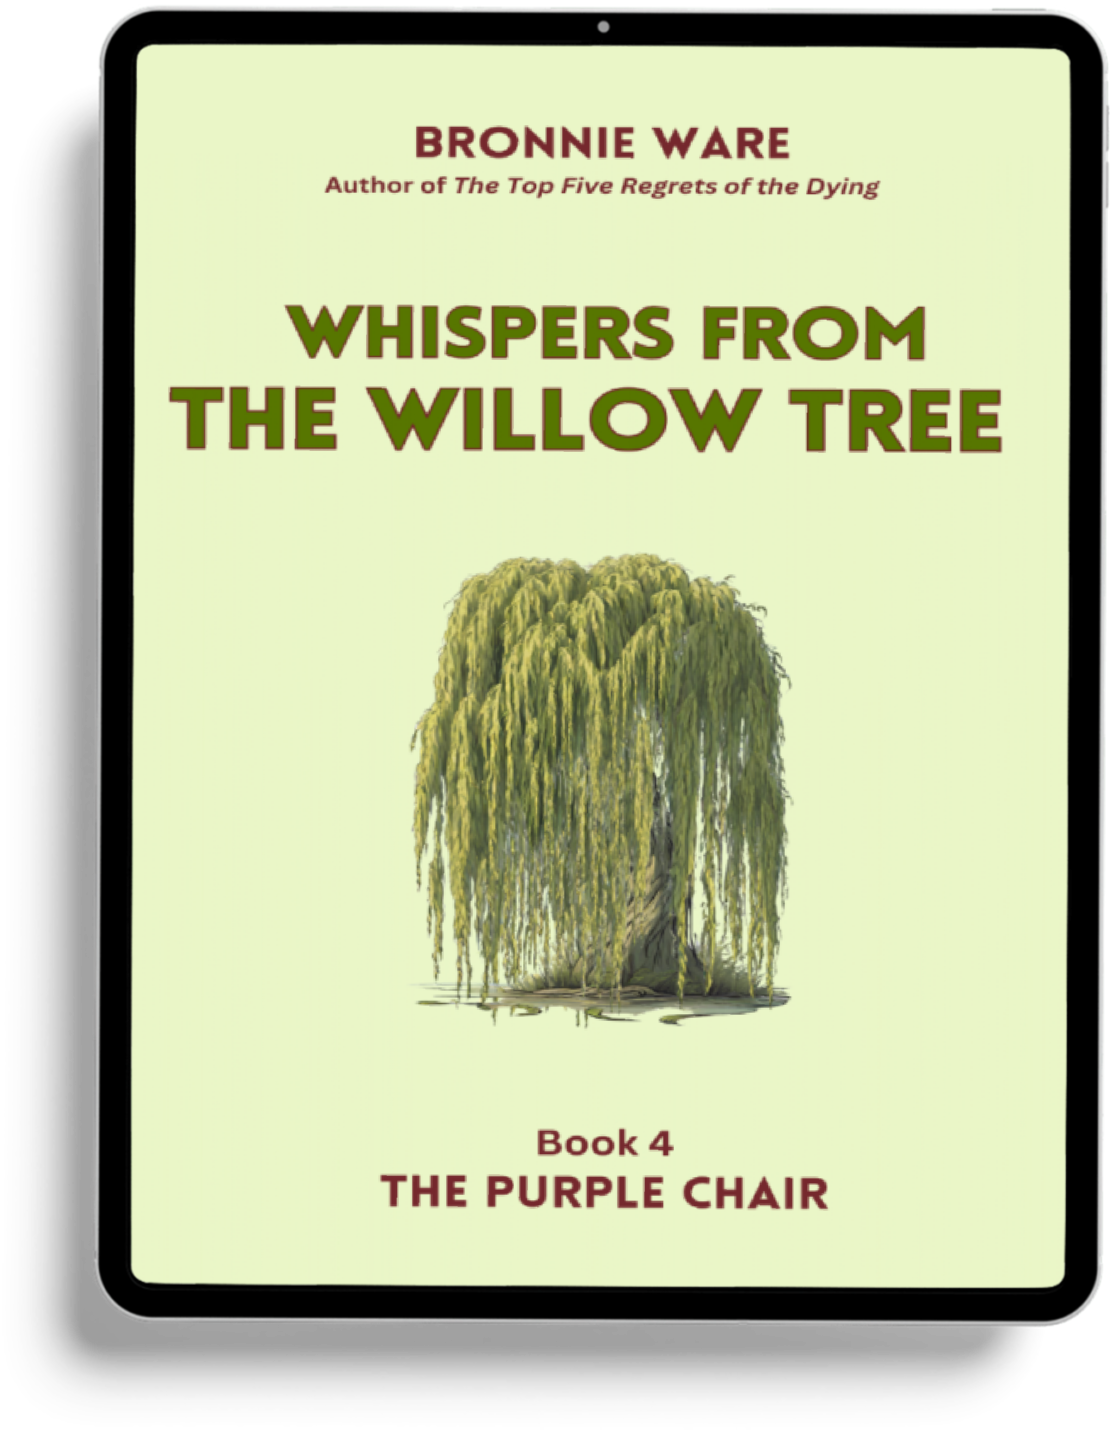 Whispers from the Willow Tree